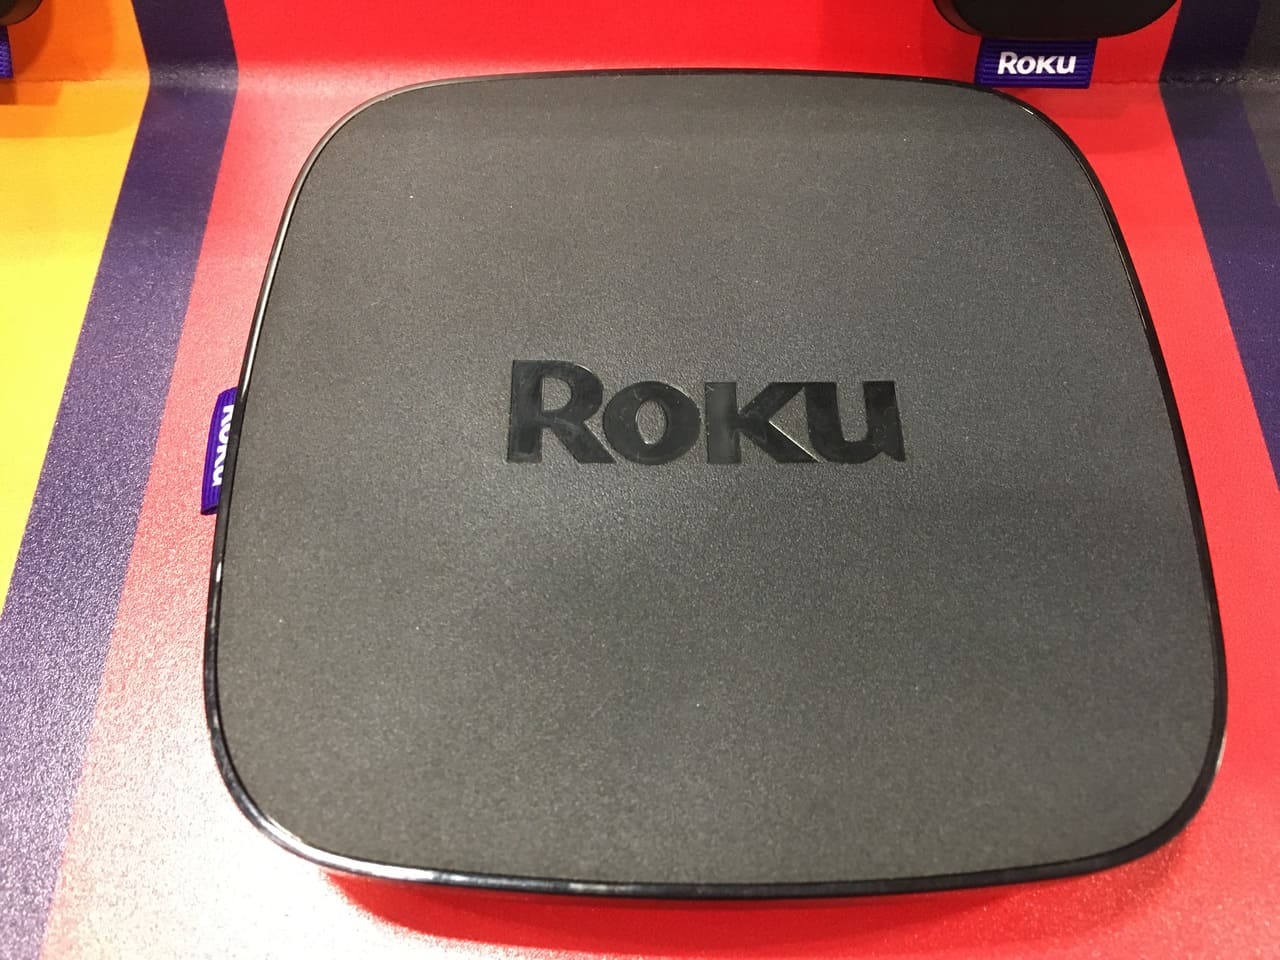 What Is Direct Roku WiFi